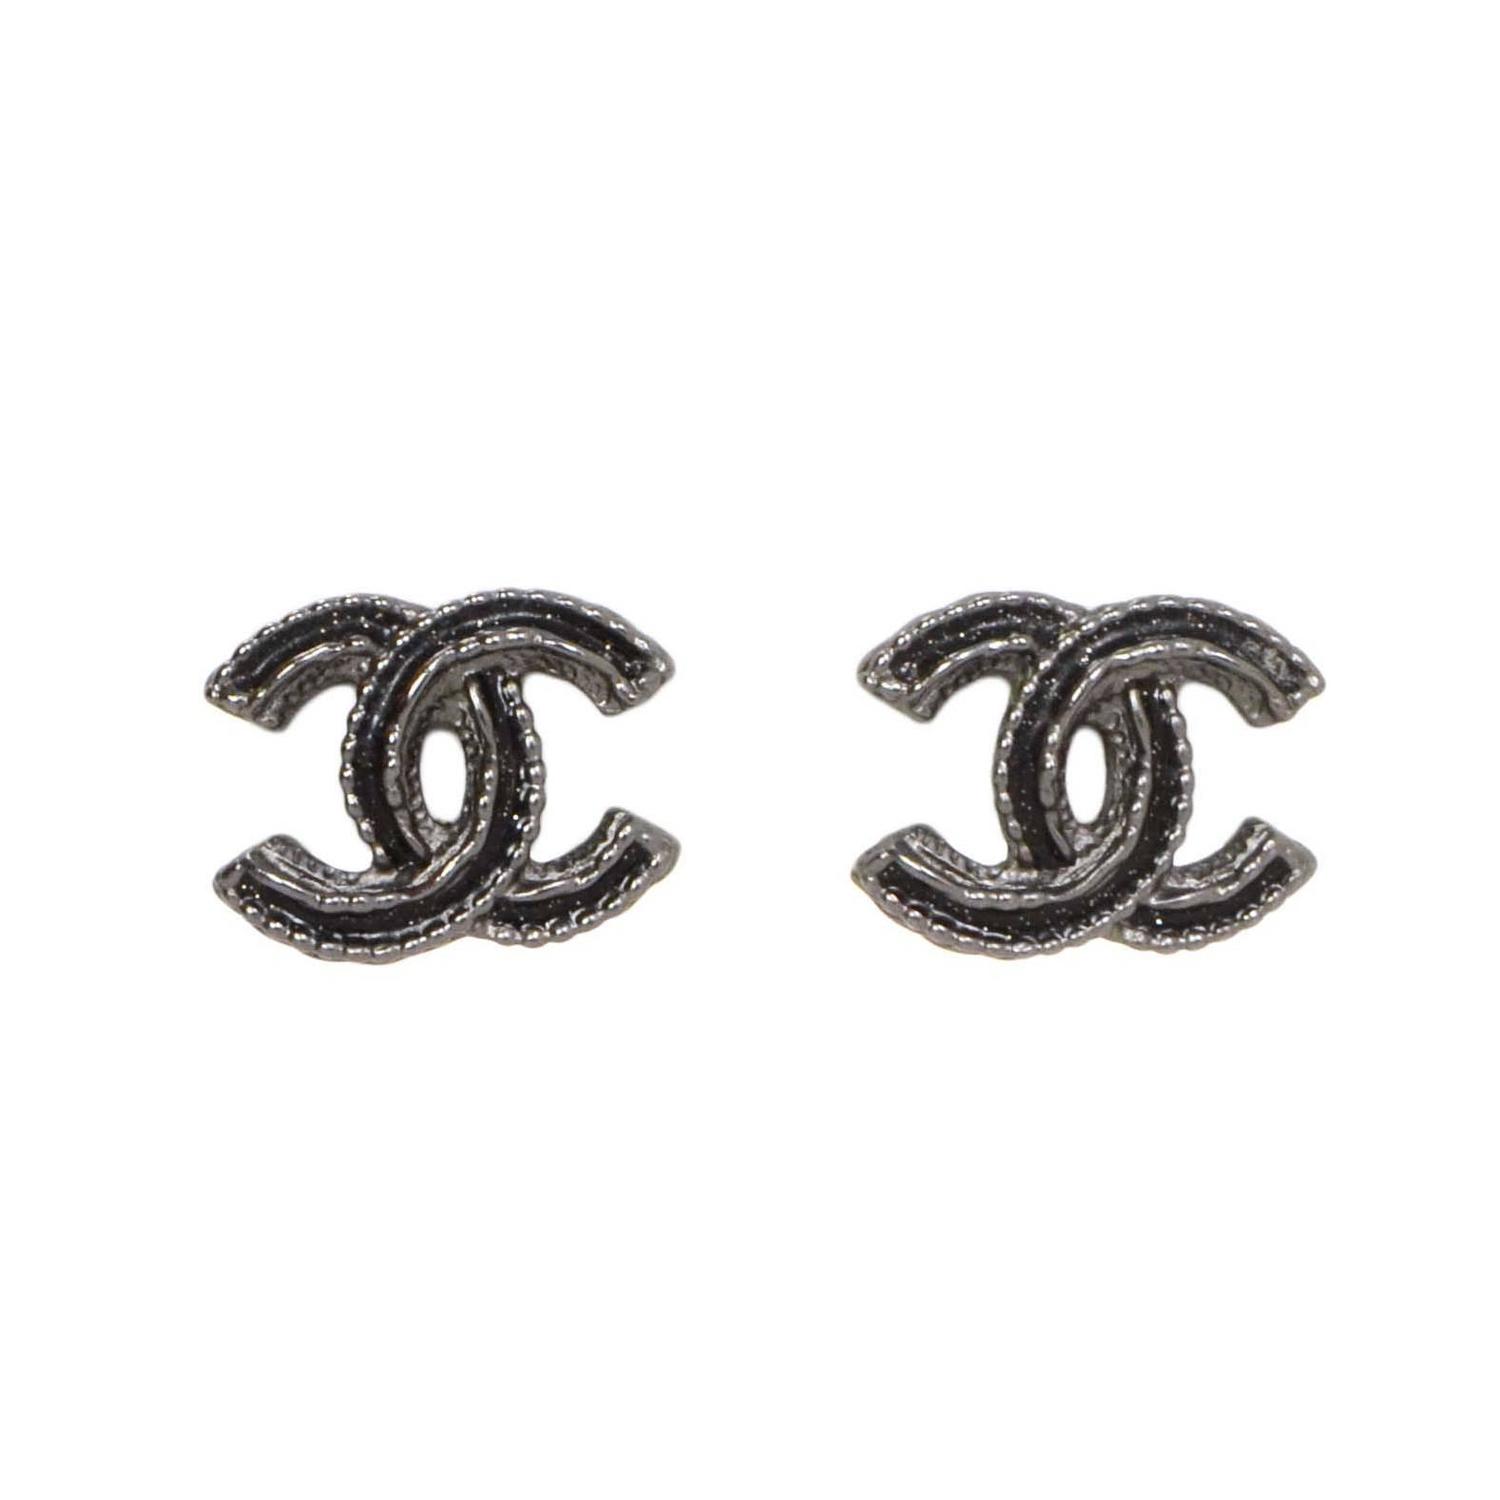 Chanel Black and Silver CC Earrings For Sale at 1stdibs